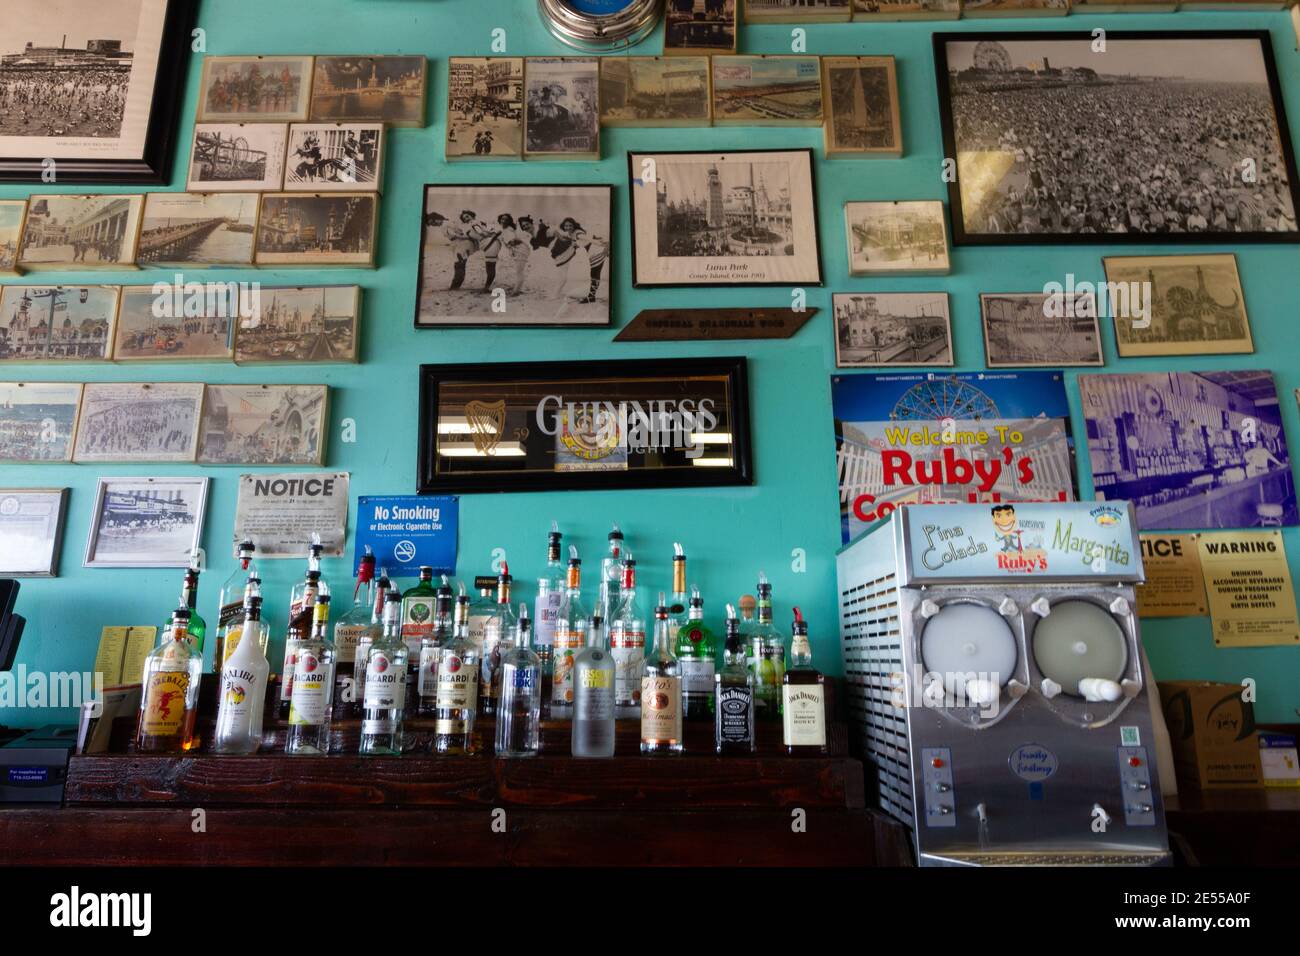 Photos and Bar at Ruby's Bar and Grill at Coney Island in Brooklyn New York Stock Photo